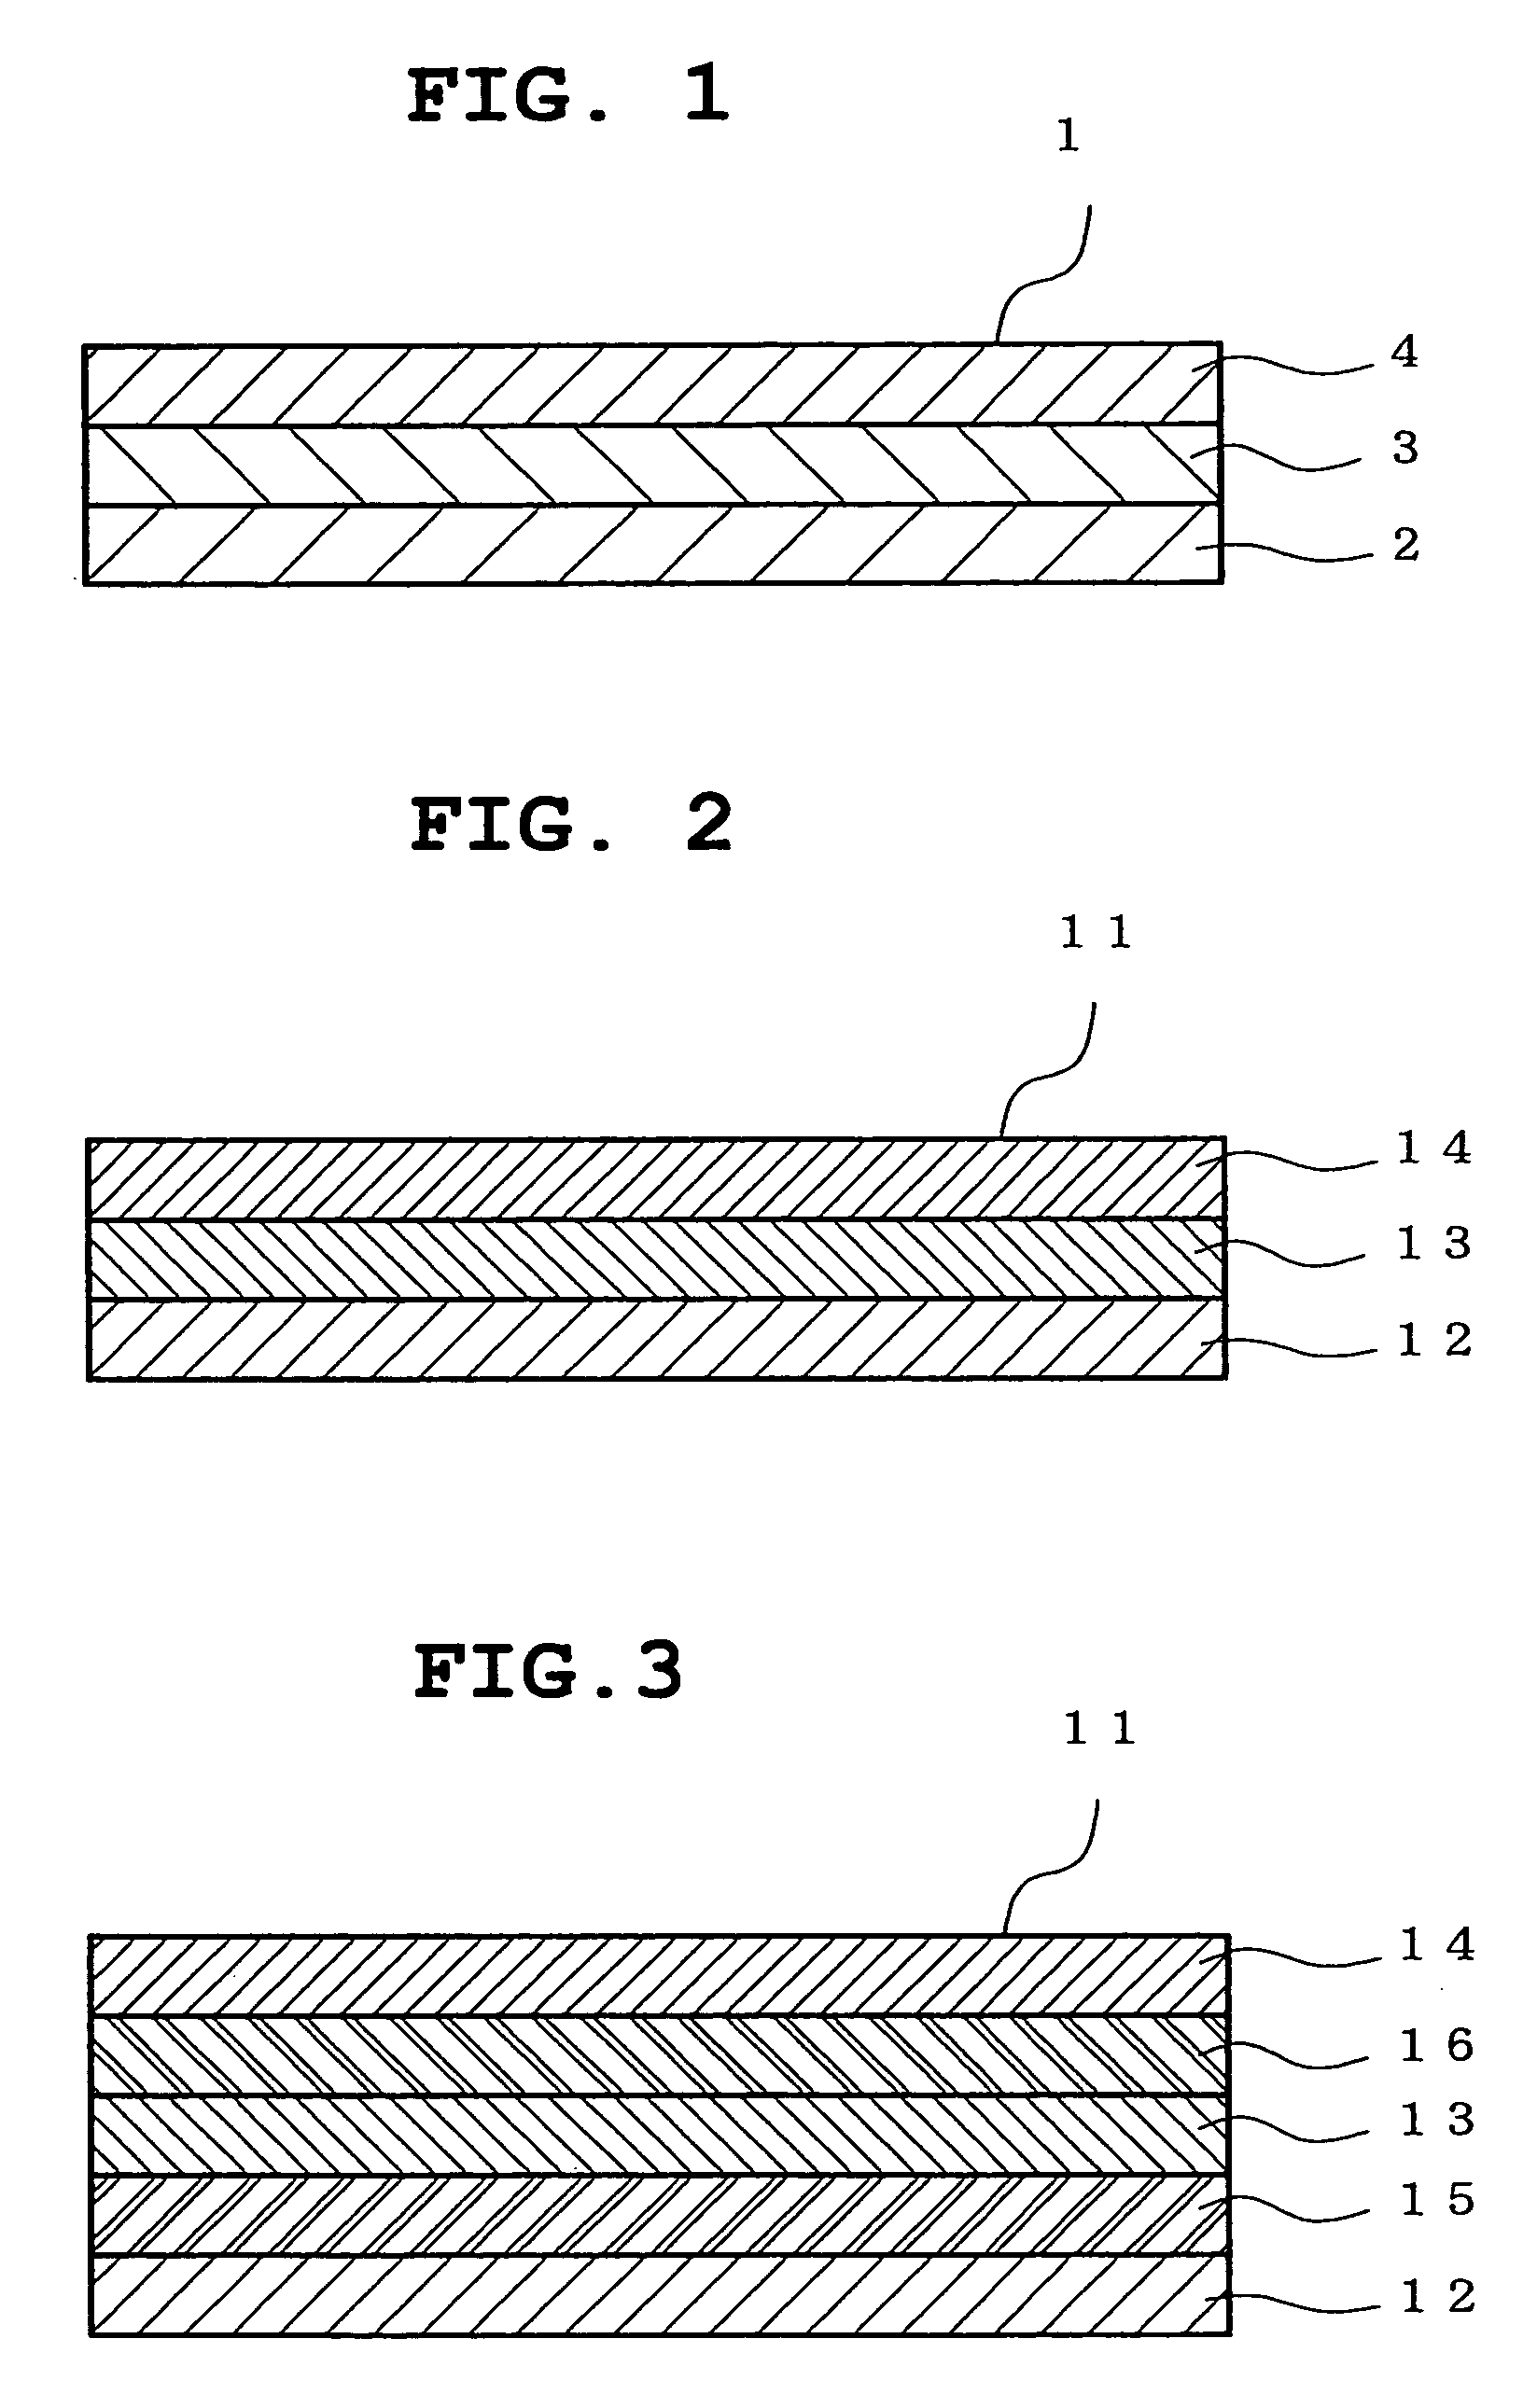 Patch package structure